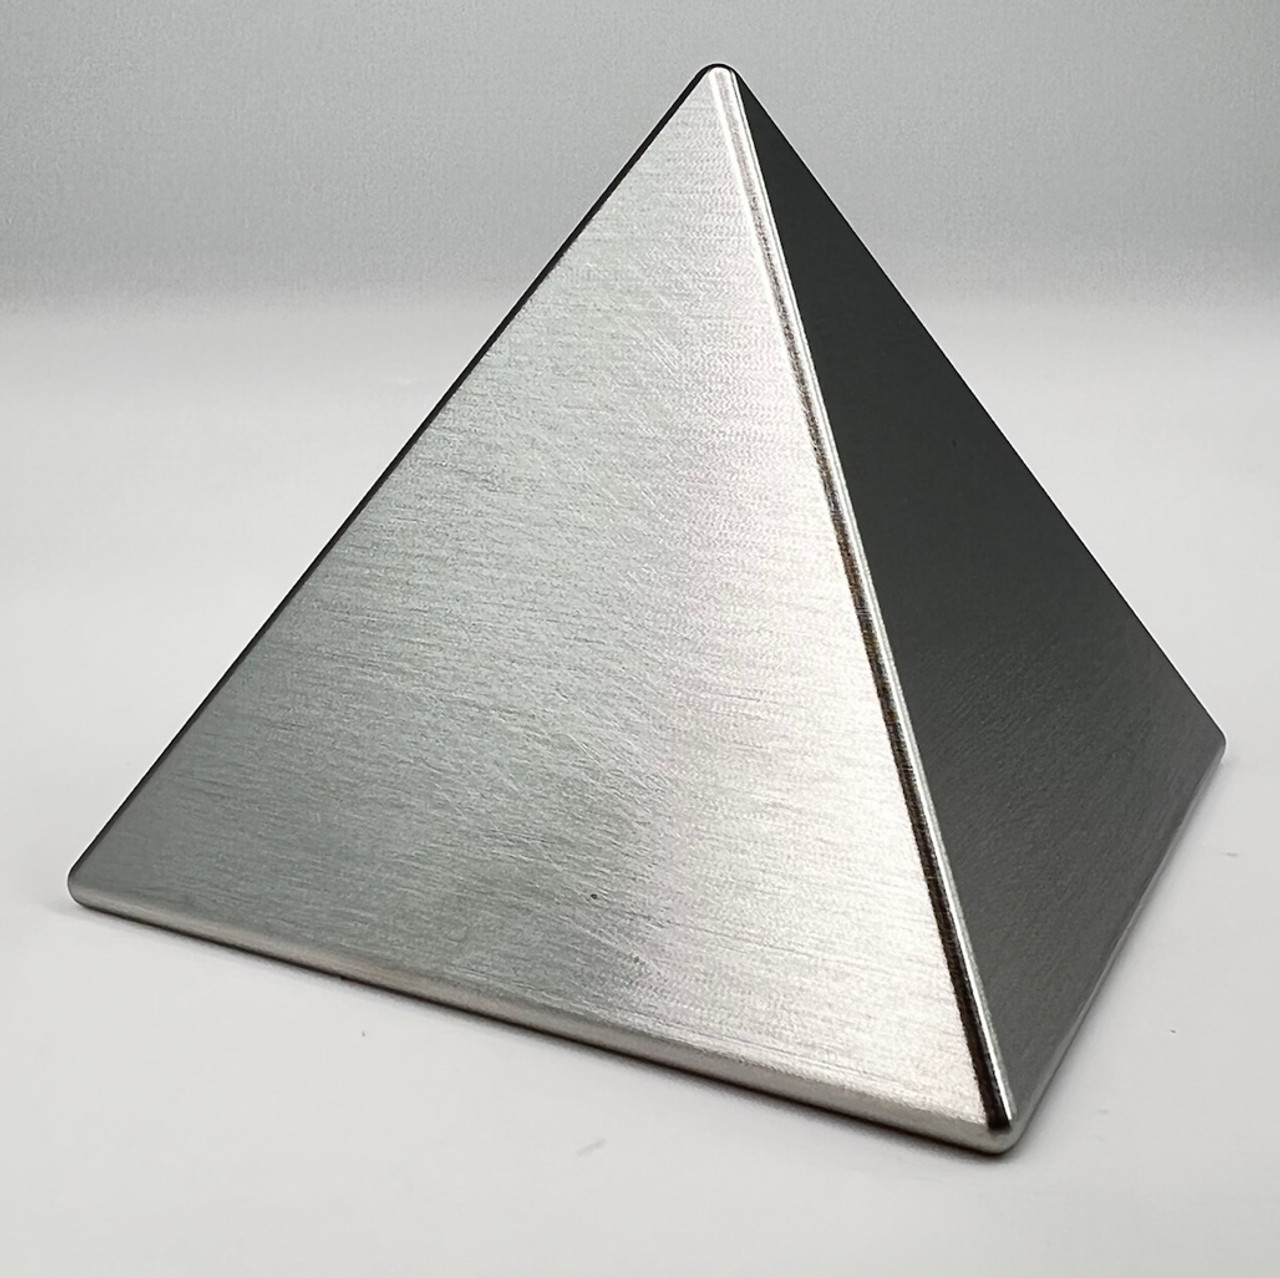 3 Inch Copper Pyramid, For Home